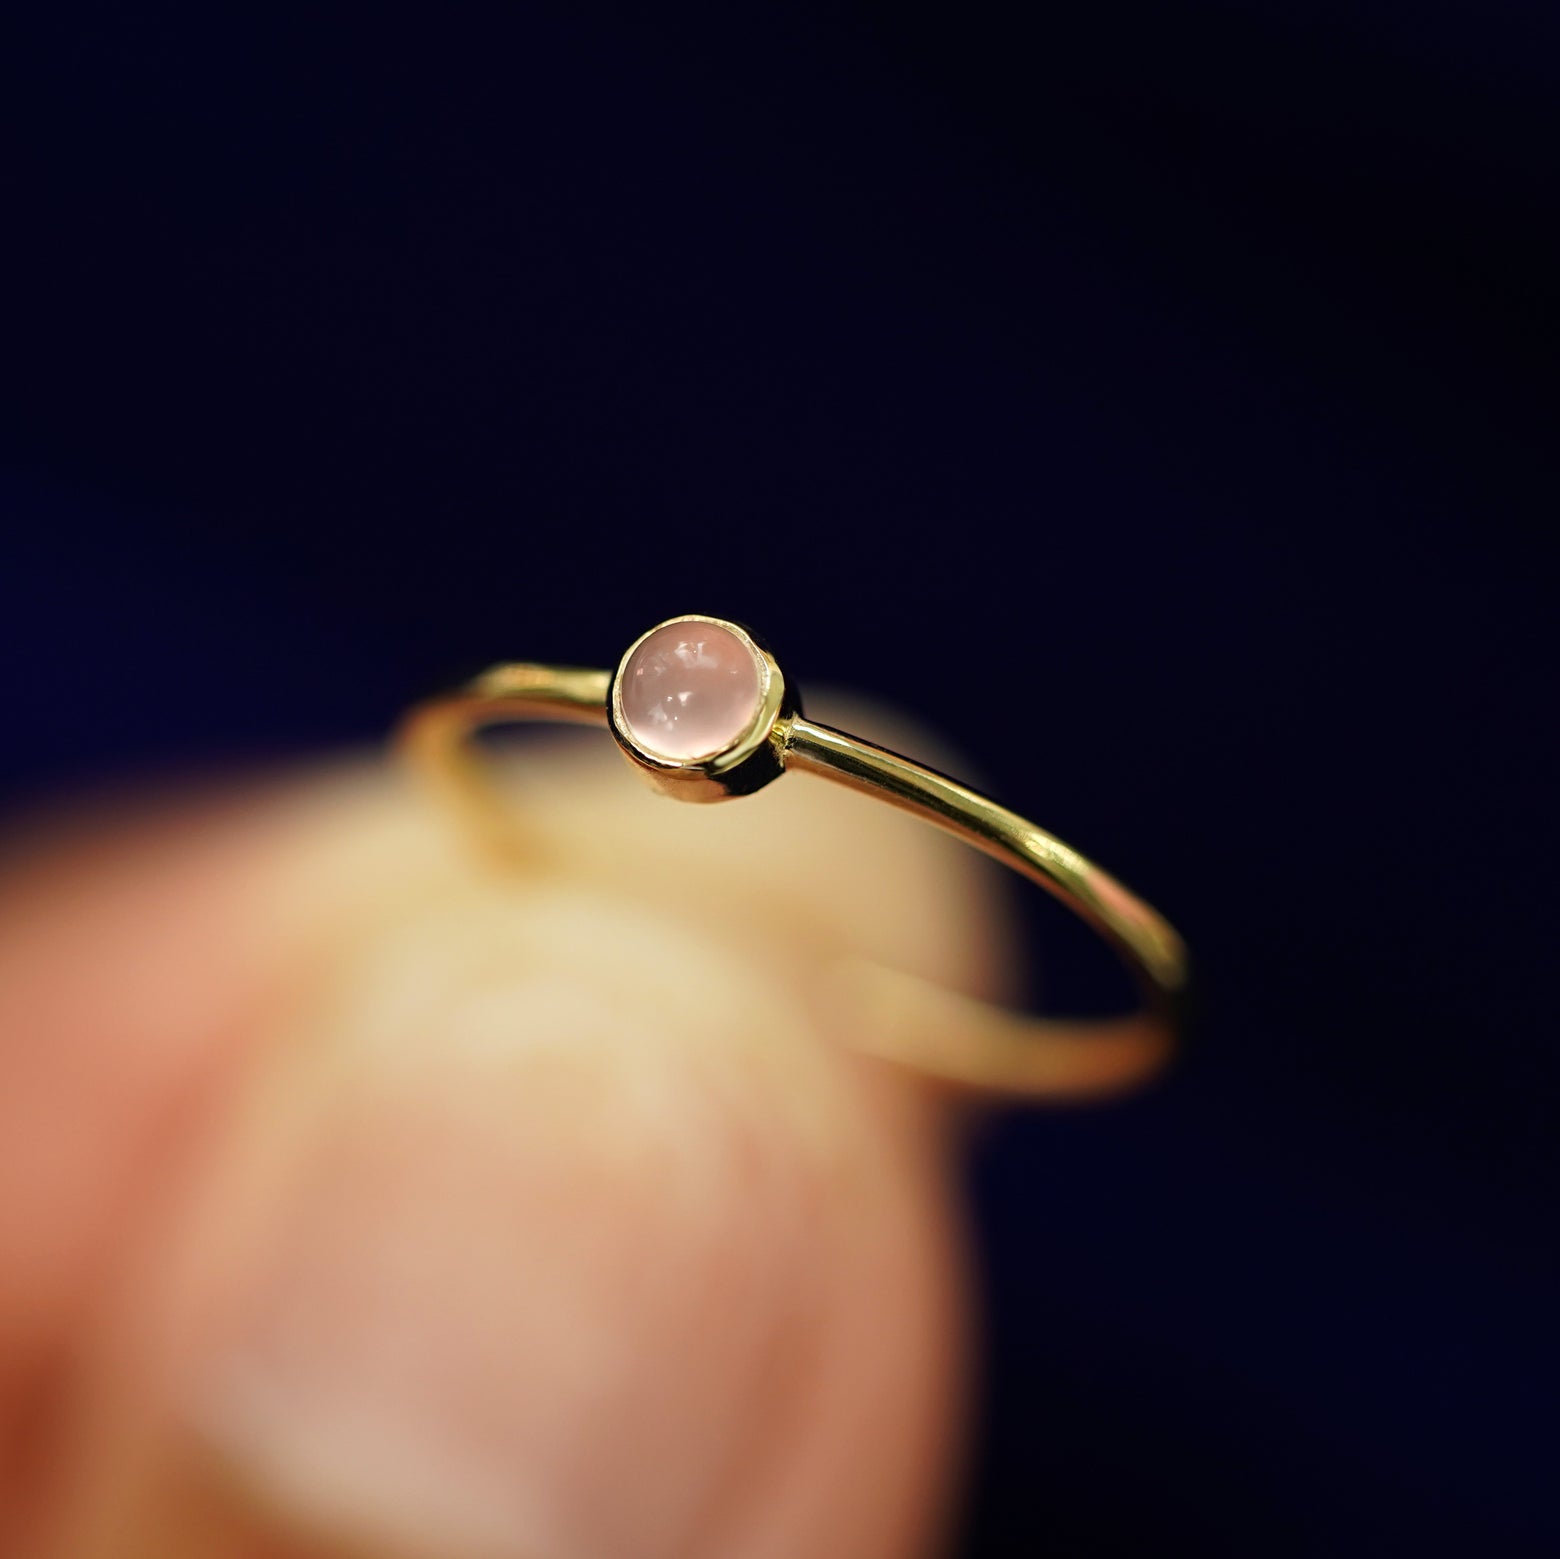 A model holding a 14k gold Rose Quartz Ring between their fingers to show the details of the bezel set stone